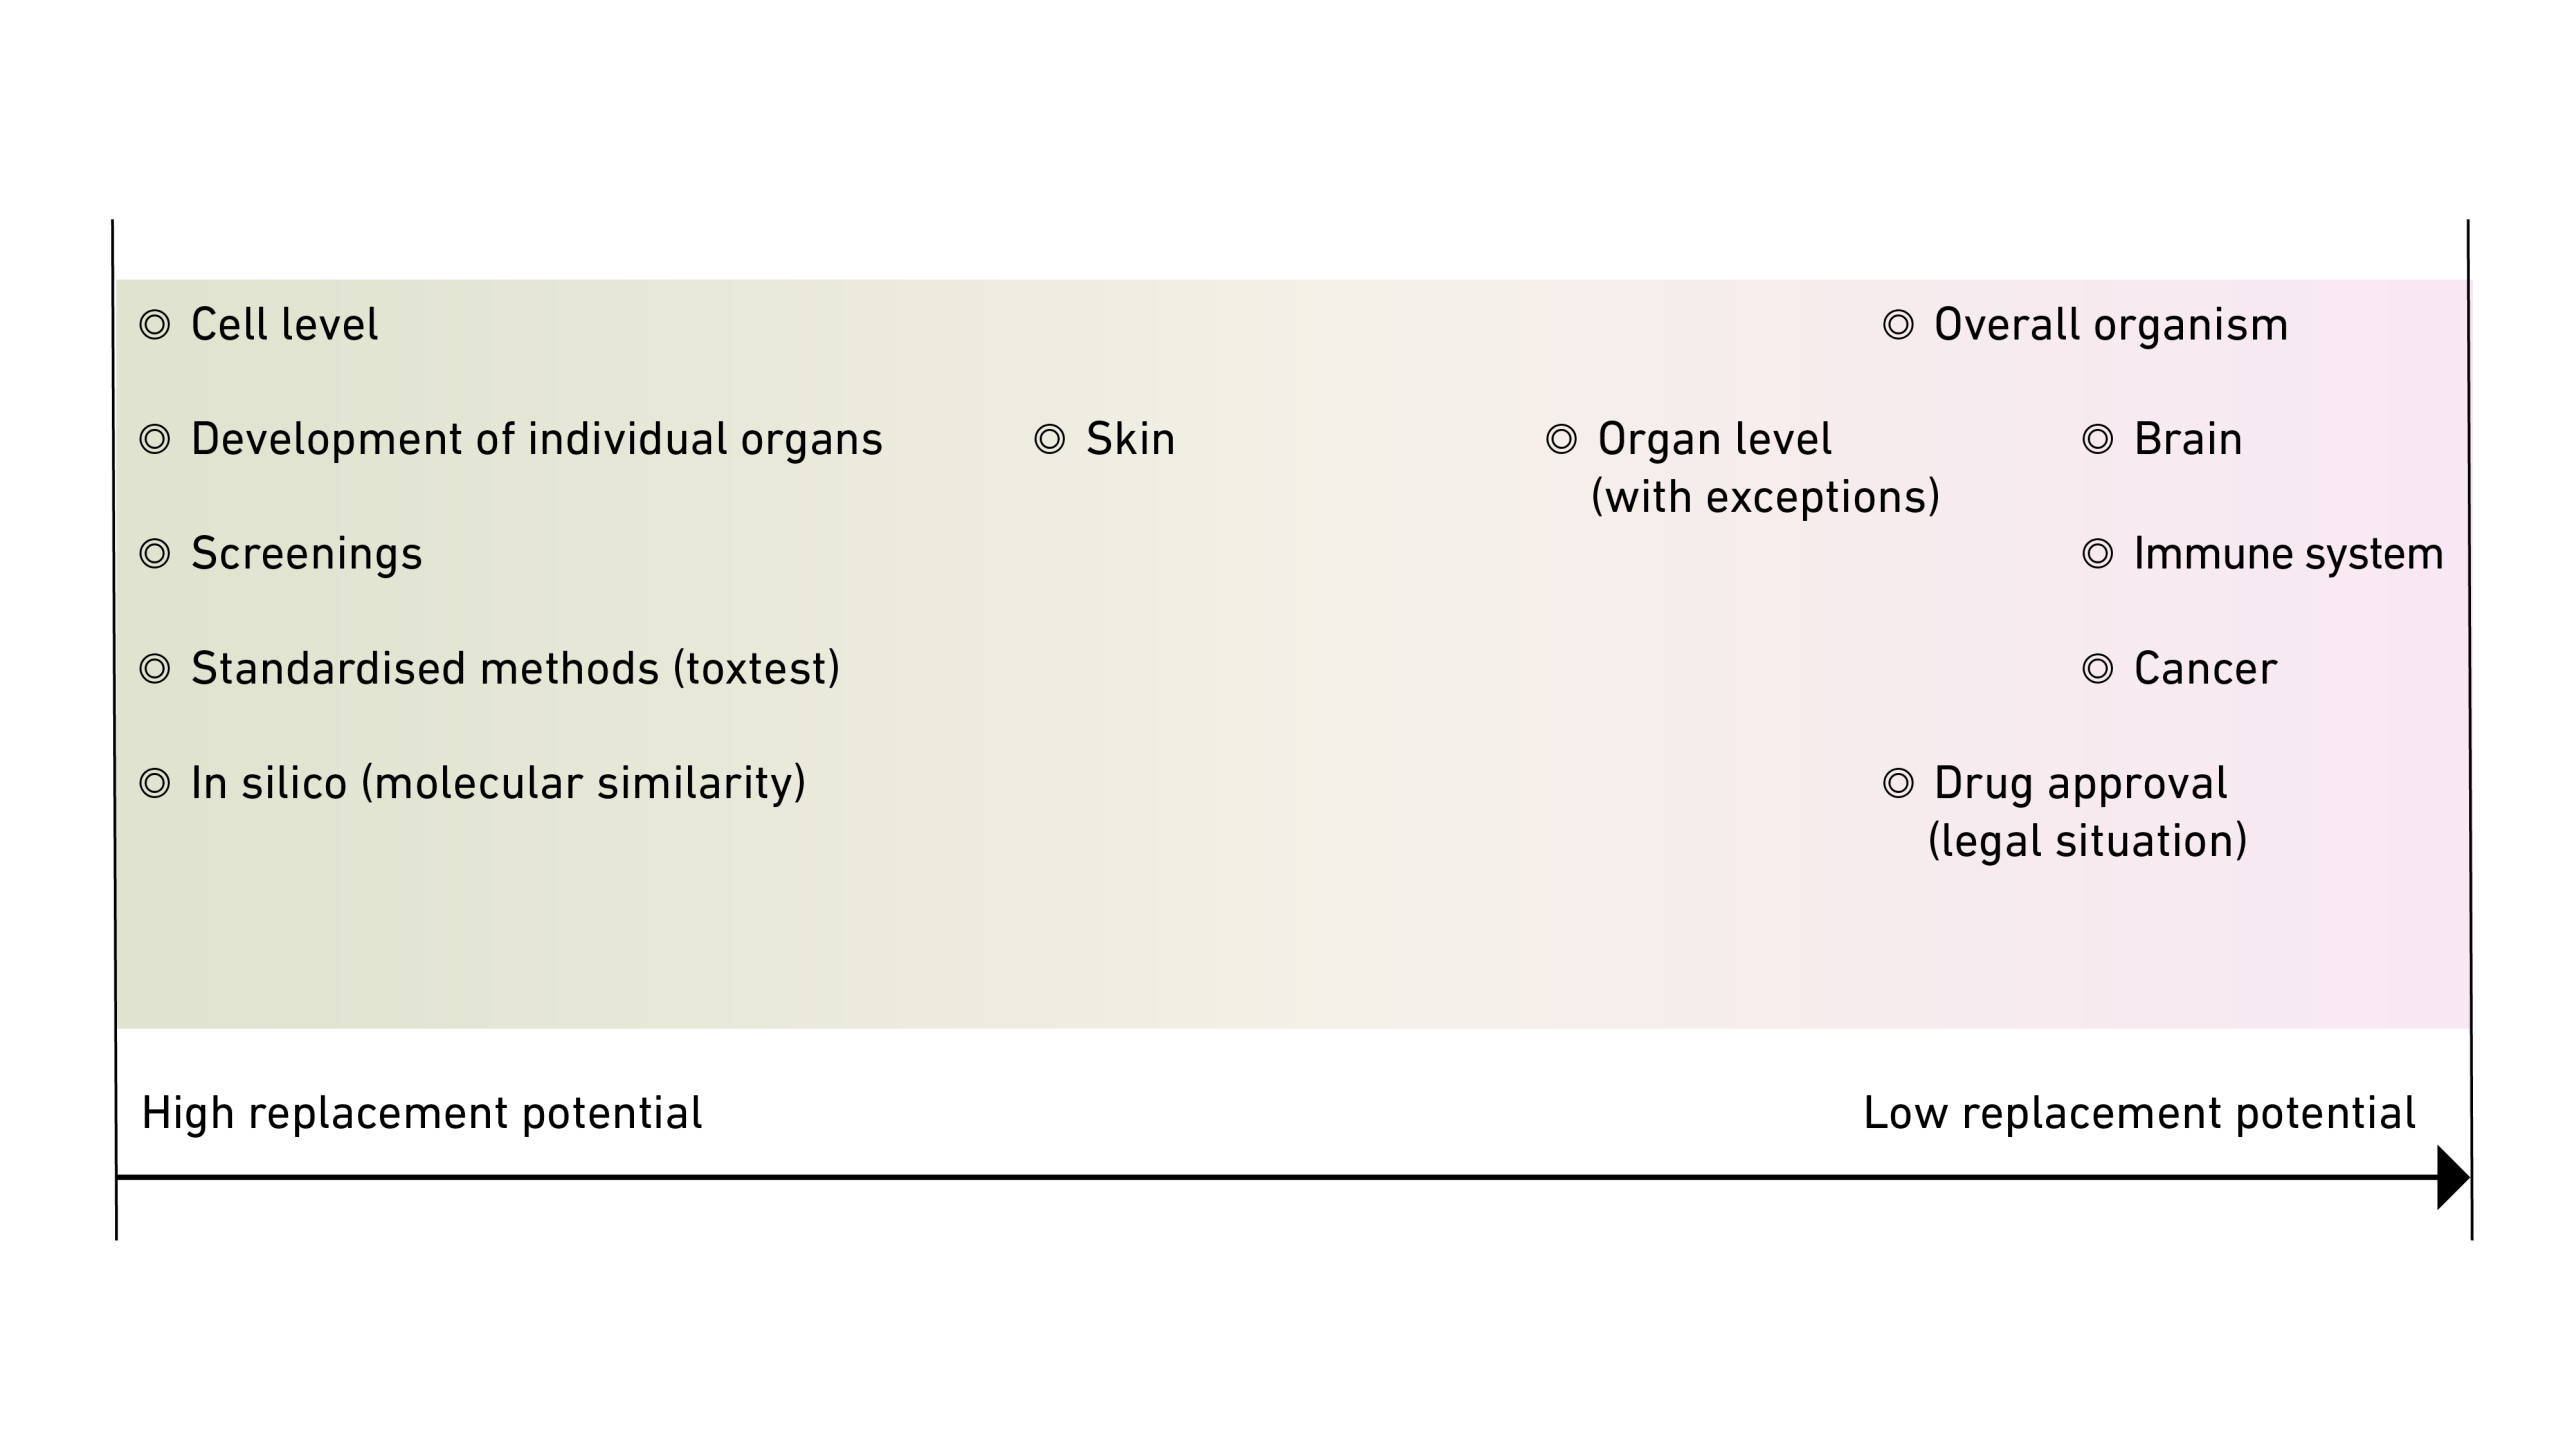 Enlarged view: Spectrum from high to low replacement potential with the individual sub-areas (e.g. cell level, skin, brain)